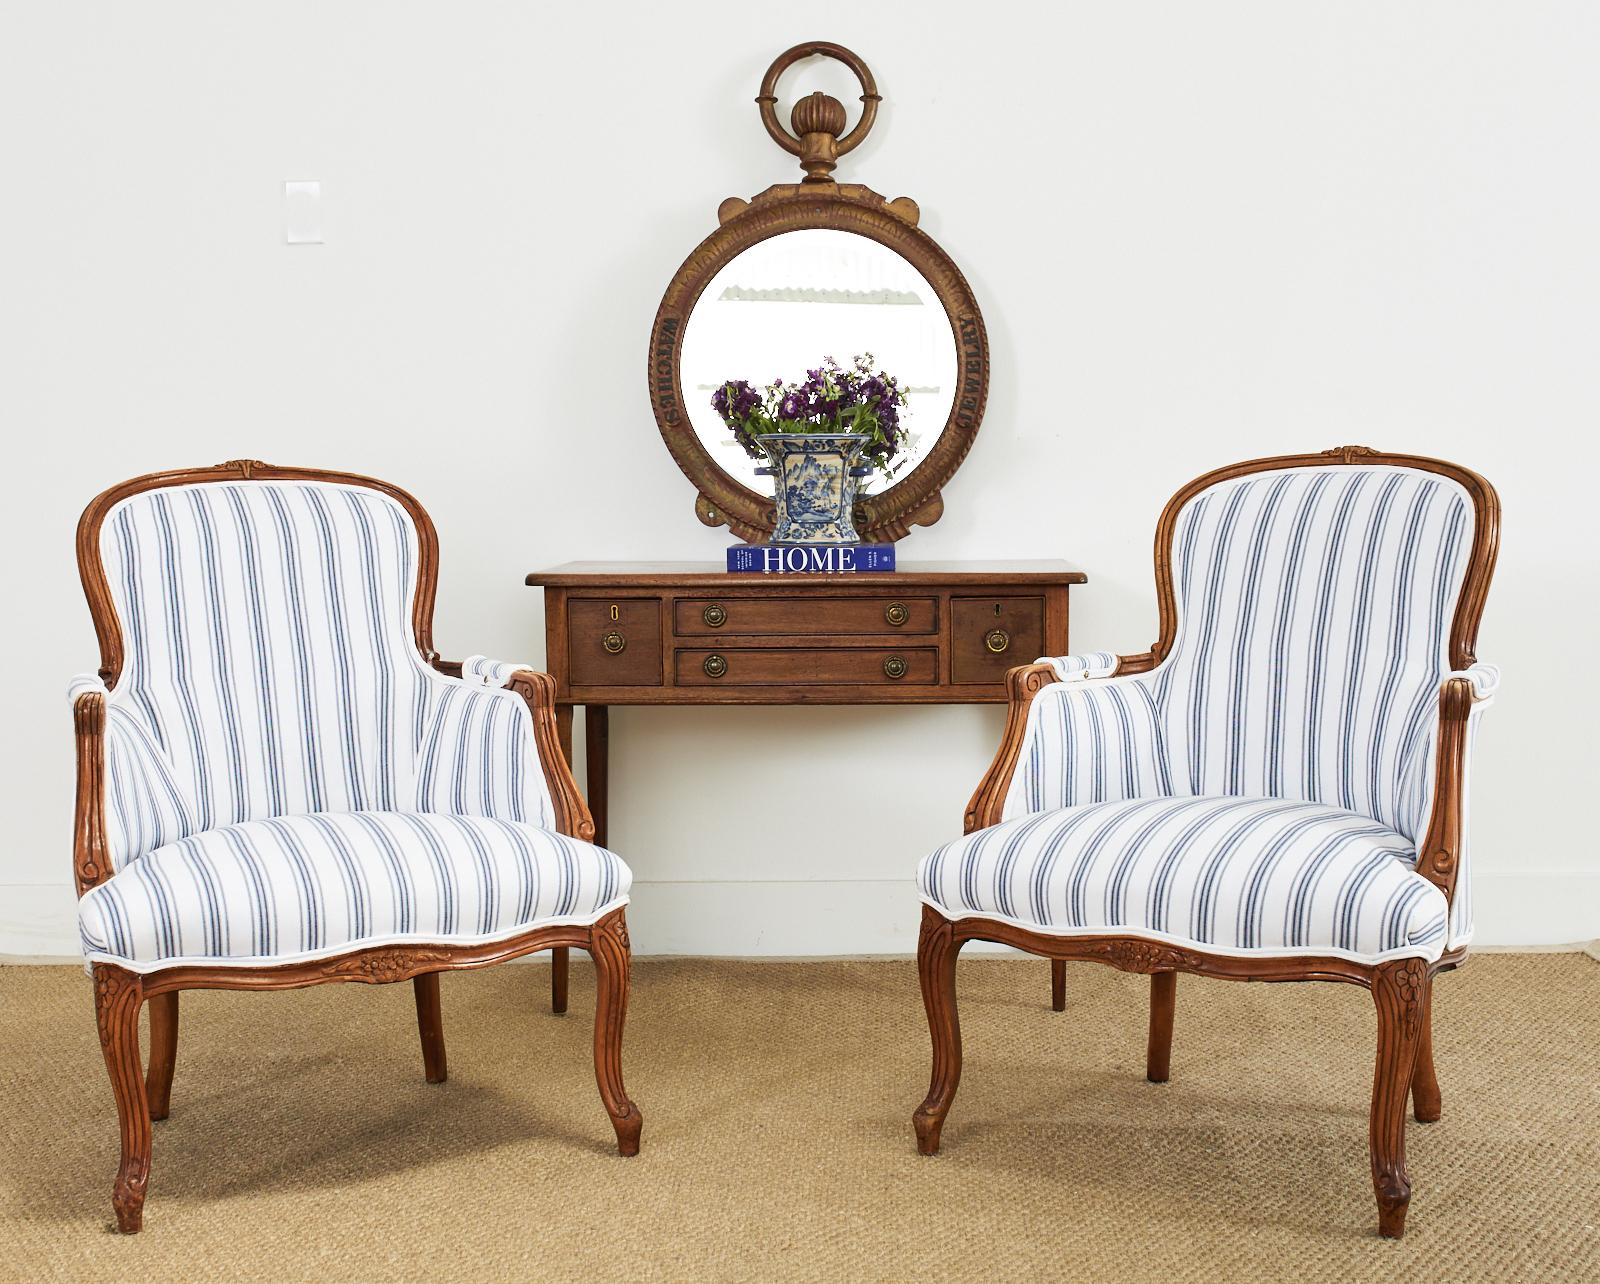 Charming pair of country French provincial style bergere armchairs featuring a blue and white fabric having a French ticking stripe style design. The molded frames feature scrolls and carved floral motifs with a gracefully curved back, arms, and